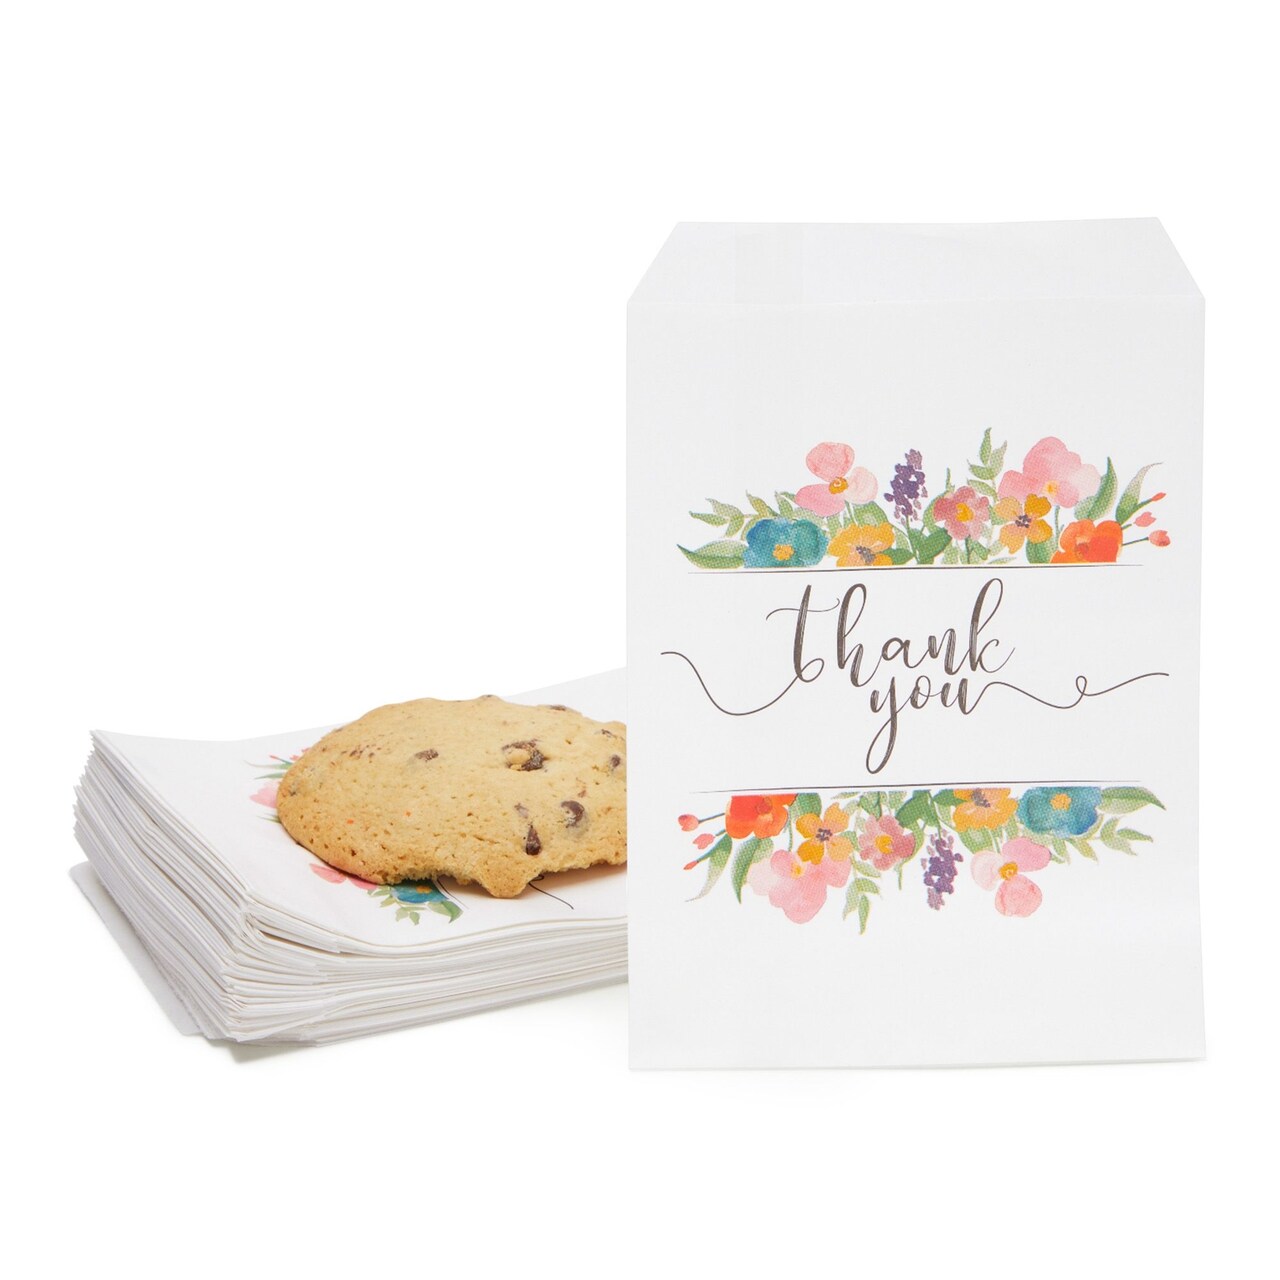 100 Pack Paper Cookie Bags, 5 x 7 Inch for Party Favors, Treats, Candy, Wedding, Individual Bag with Floral Thank You Design, Mini Gift Bags for Snacks, Goodies